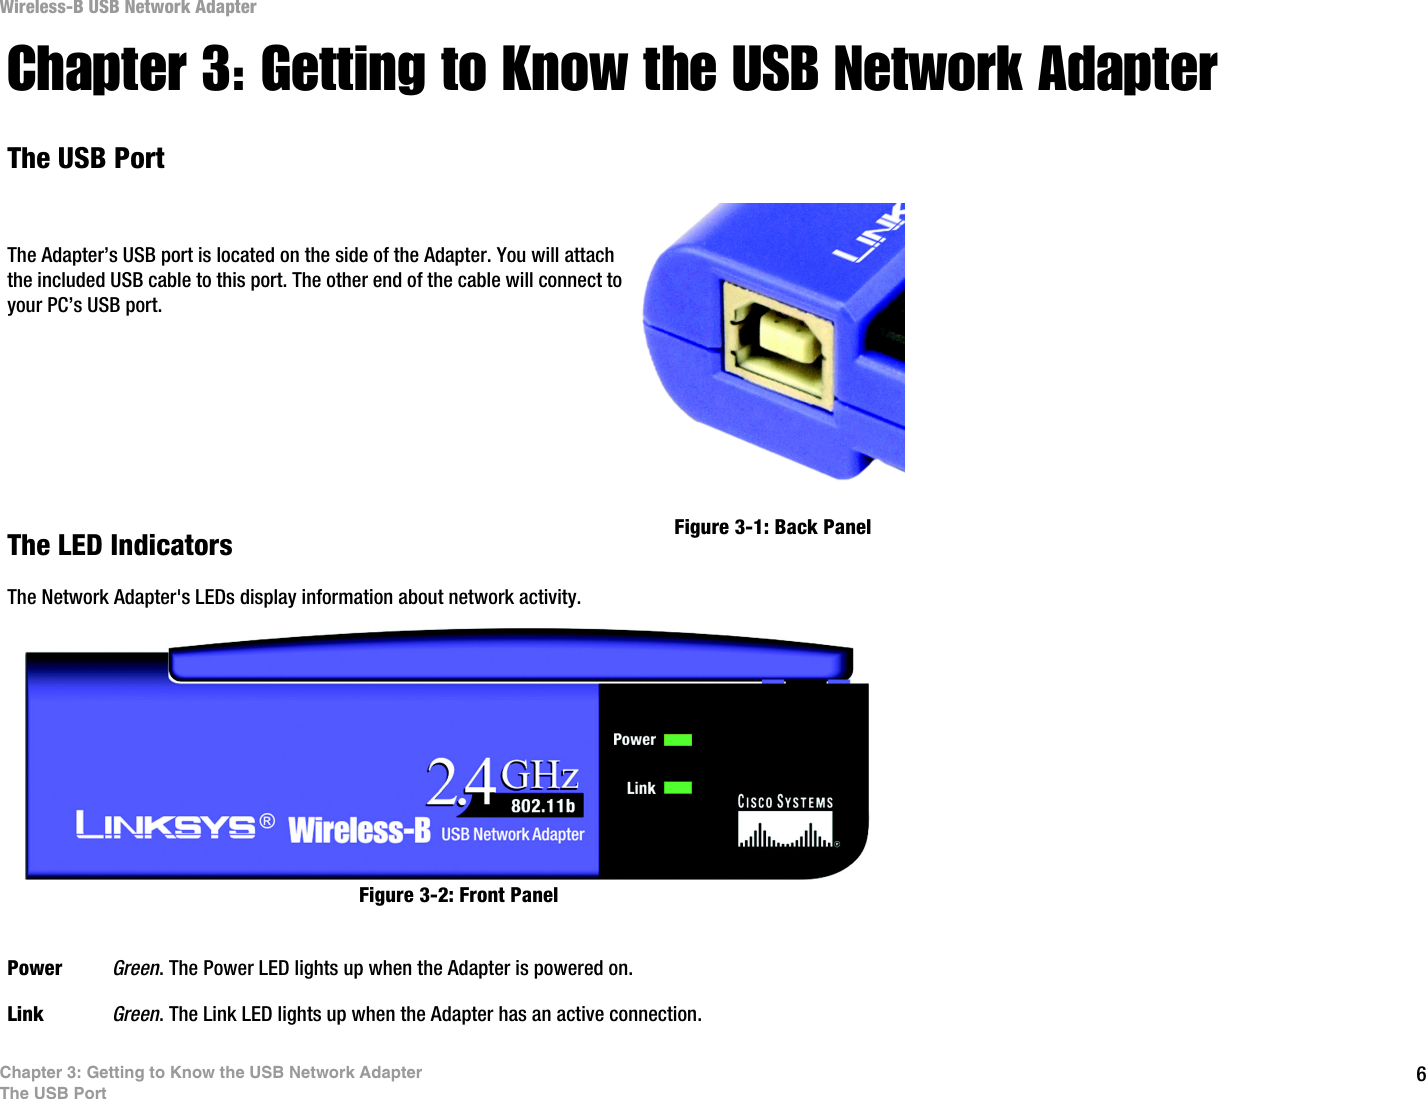 6Chapter 3: Getting to Know the USB Network AdapterThe USB PortWireless-B USB Network AdapterChapter 3: Getting to Know the USB Network AdapterThe USB PortThe Adapter’s USB port is located on the side of the Adapter. You will attach the included USB cable to this port. The other end of the cable will connect to your PC’s USB port.The LED IndicatorsThe Network Adapter&apos;s LEDs display information about network activity.Power Green. The Power LED lights up when the Adapter is powered on.Link Green. The Link LED lights up when the Adapter has an active connection. Figure 3-1: Back PanelFigure 3-2: Front Panel